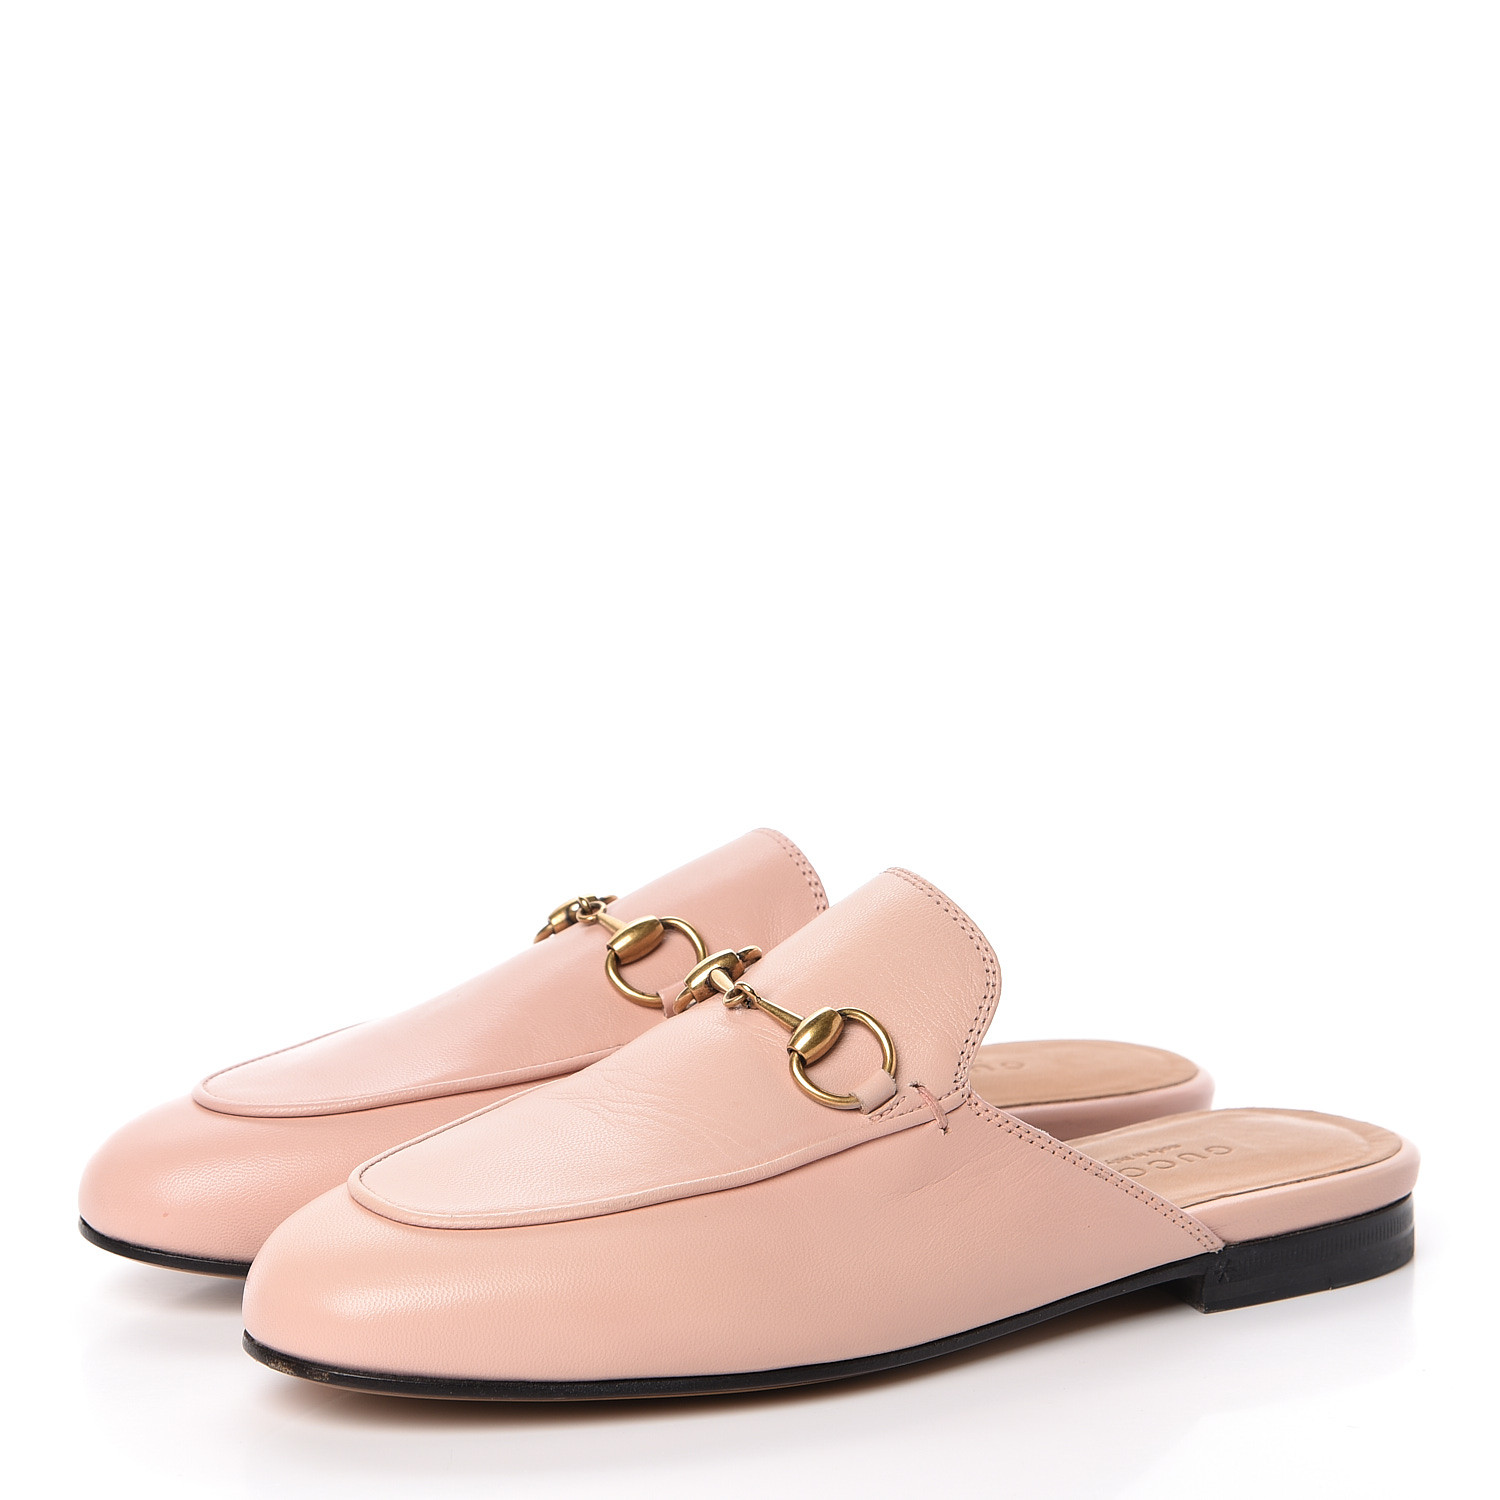 GUCCI Calfskin Womens Princetown Slippers 35 Pink 498038 | FASHIONPHILE